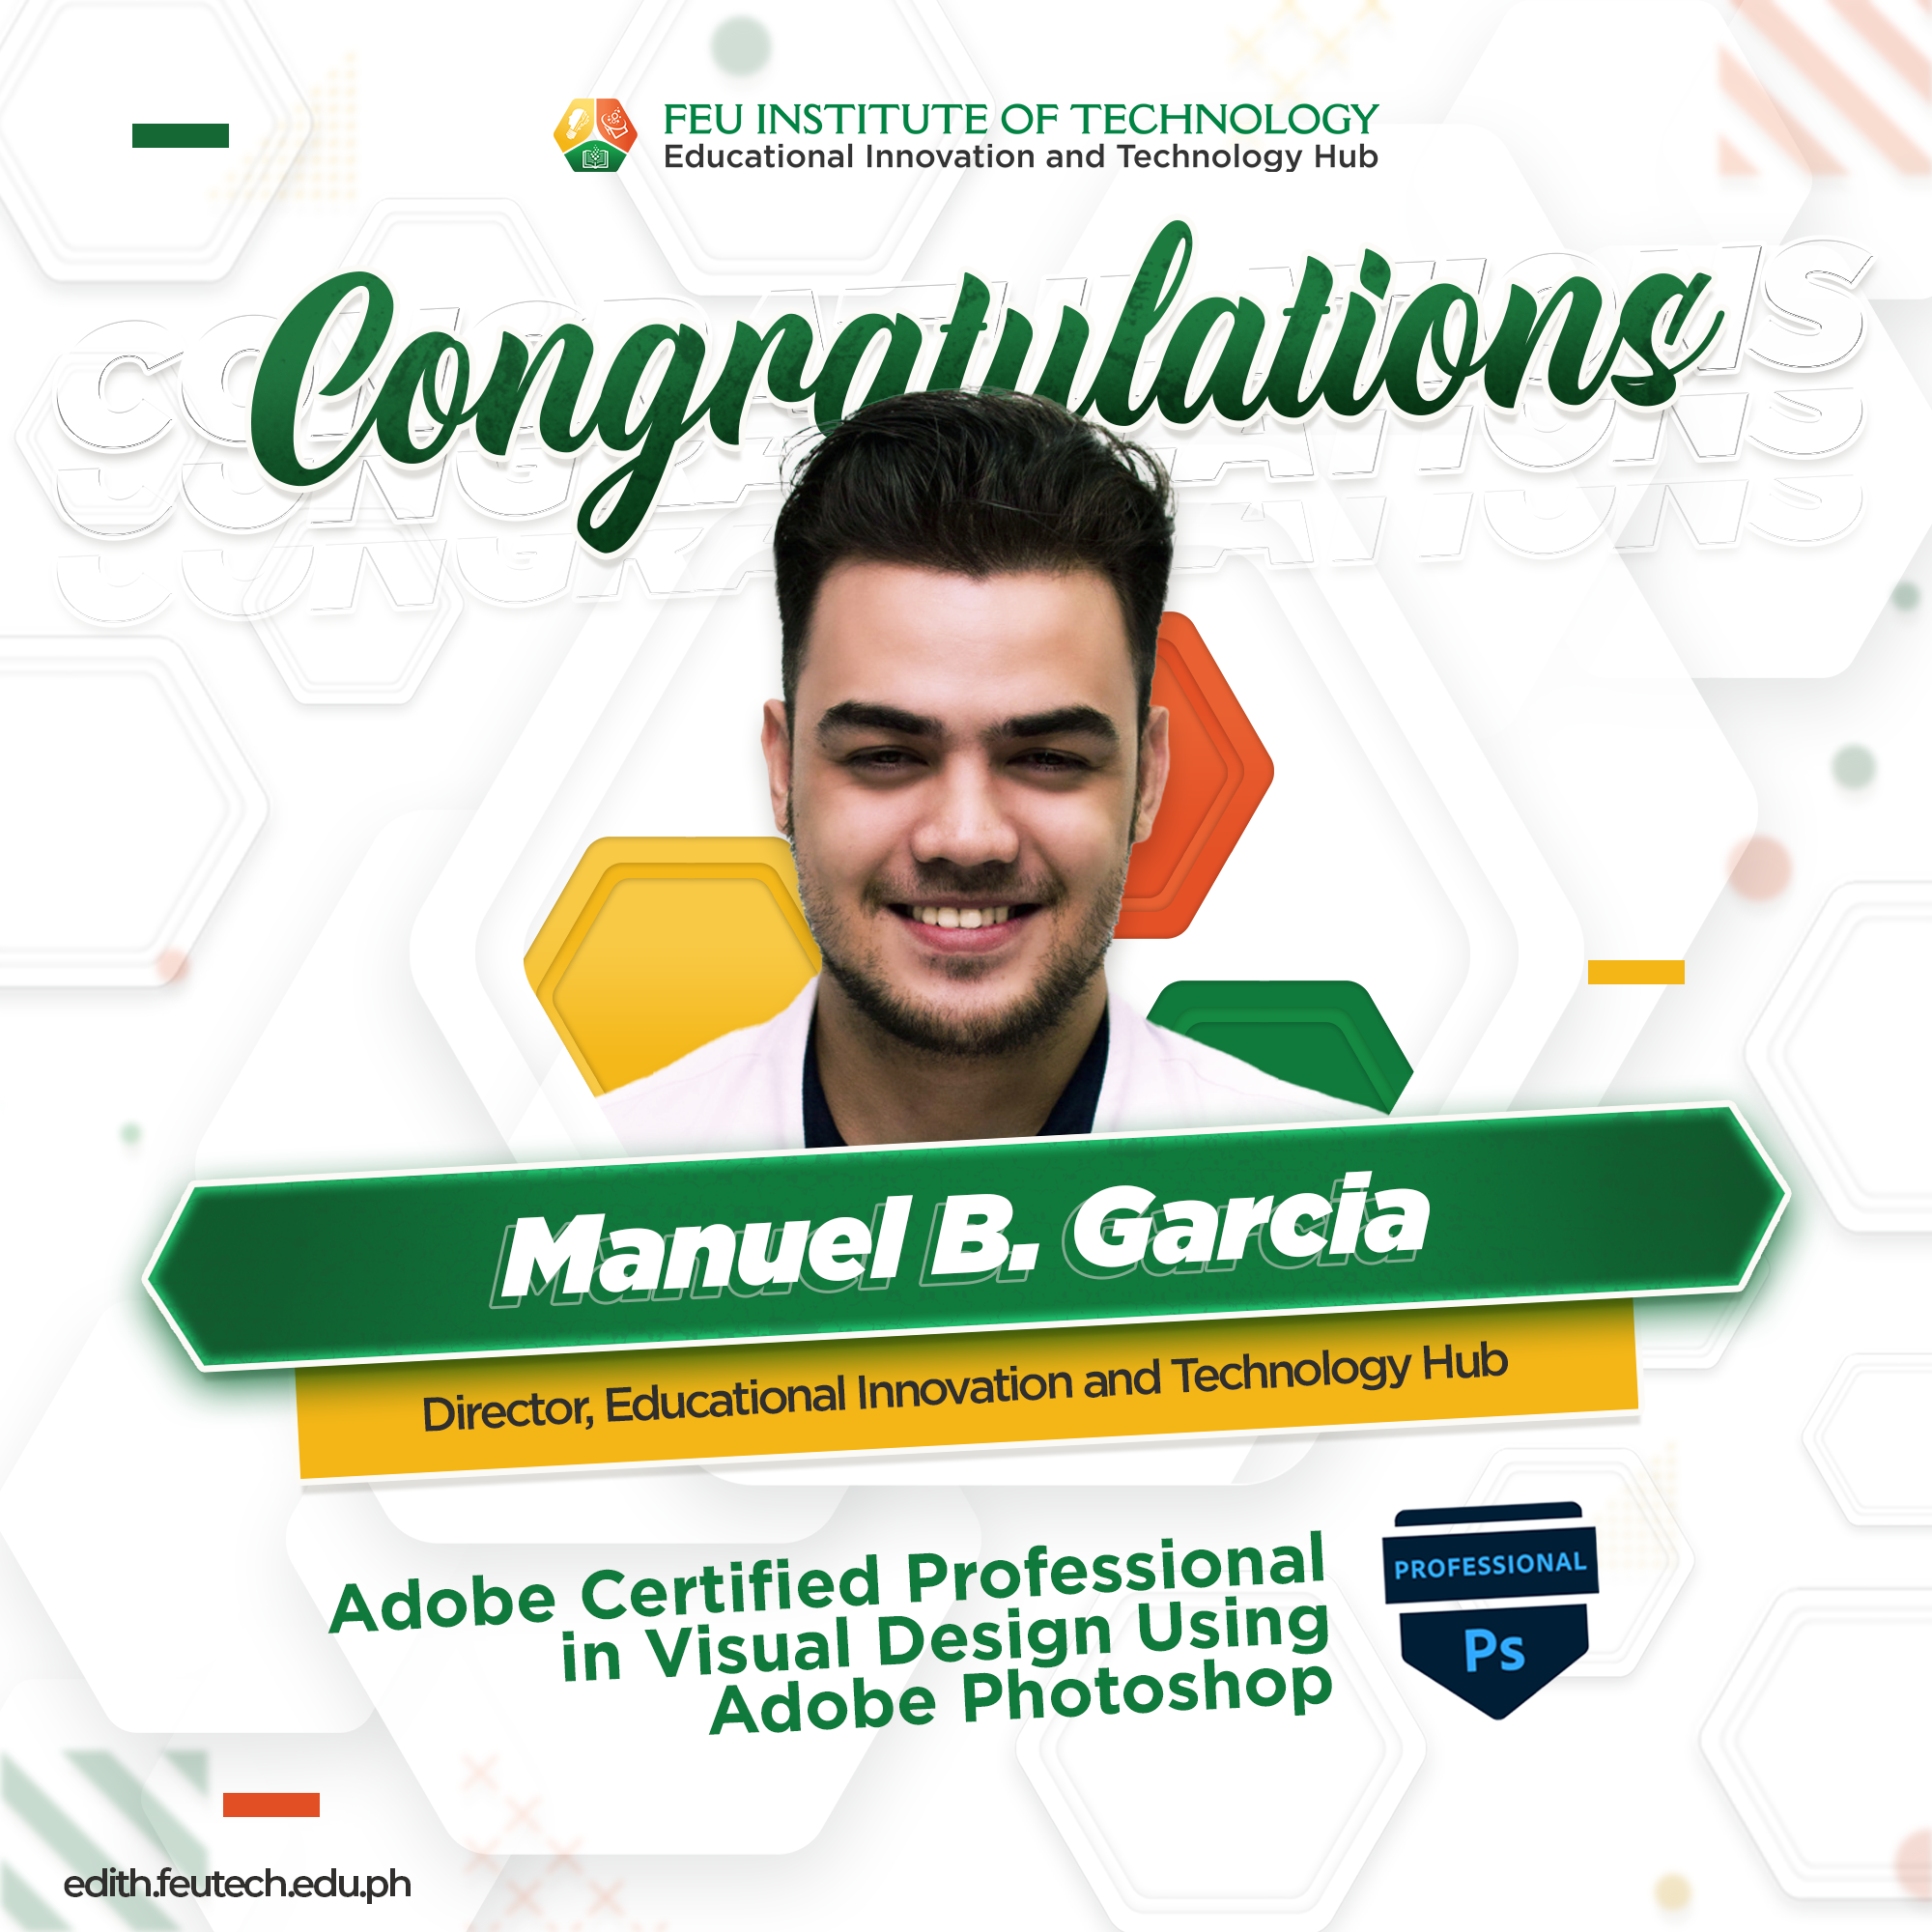 Dr. Manuel B. Garcia is now an Adobe Certified Professional in Visual Design Using Adobe Photoshop